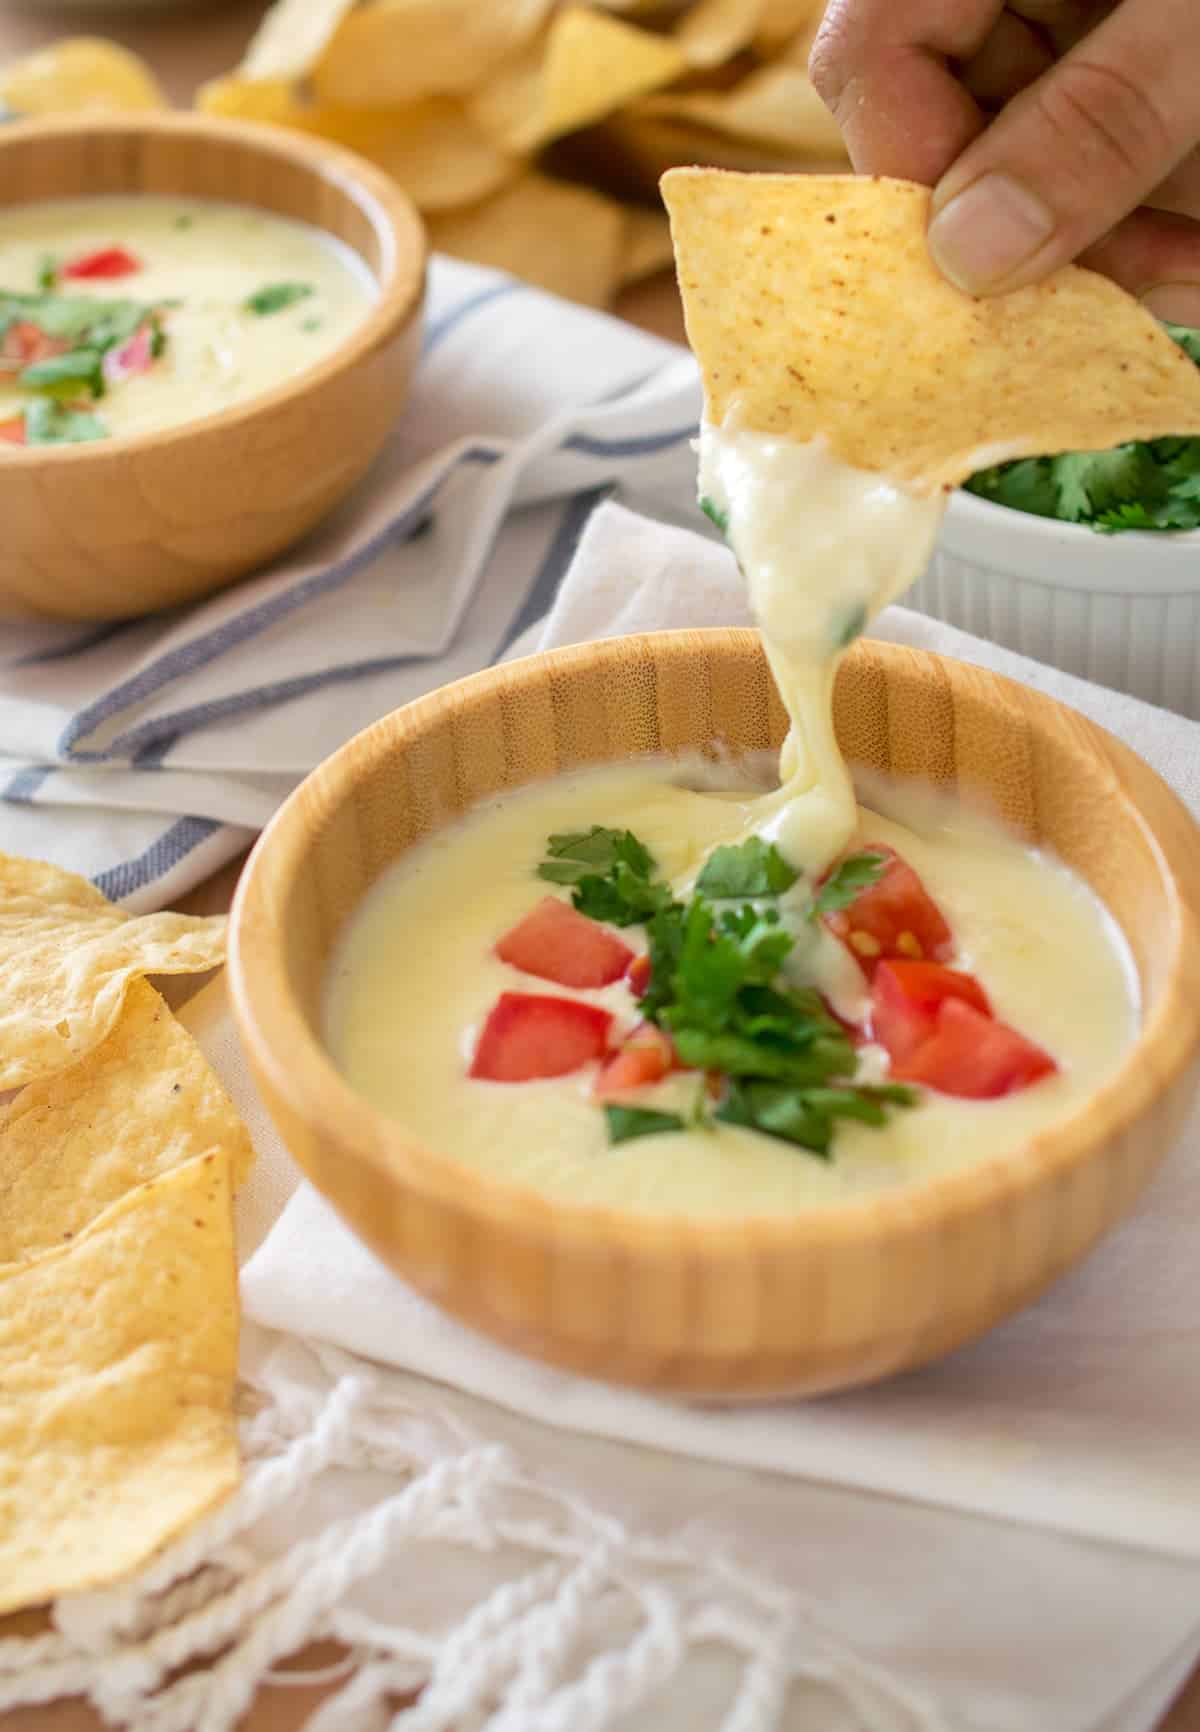 Close up of tortilla chip dipping into queso bowl. Queso topped with pico in wooden bowl container.